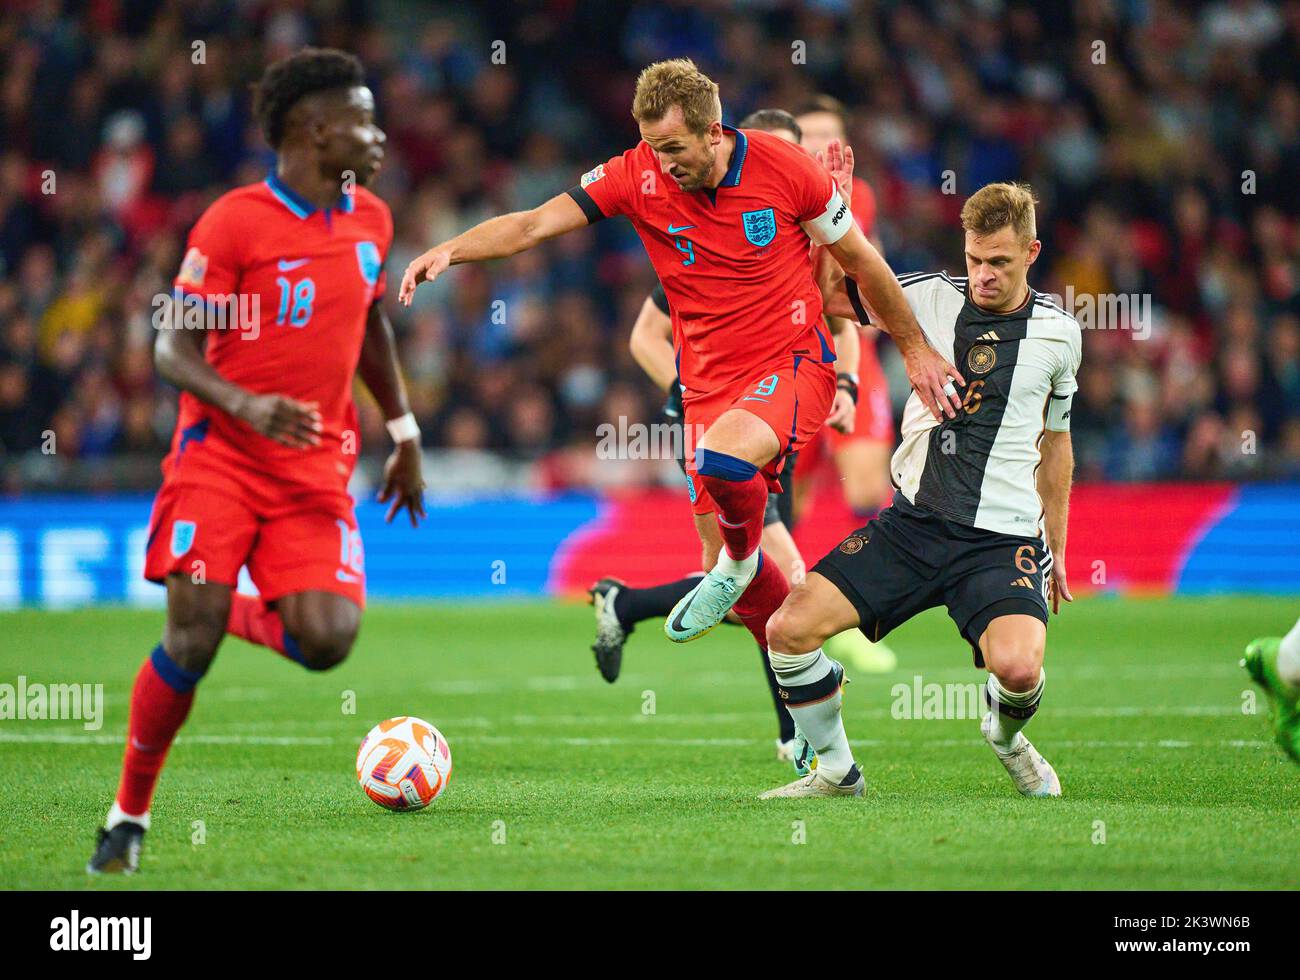 Harry KANE, England 9   compete for the ball, tackling, duel, header, zweikampf, action, fight against Joshua Kimmich, DFB 6  in the UEFA Nations League 2022 match  ENGLAND - GERMANY 3-3  in Season 2022/2023 on Sept 26, 2022  in London, Great Britain.  © Peter Schatz / Alamy Live News Stock Photo